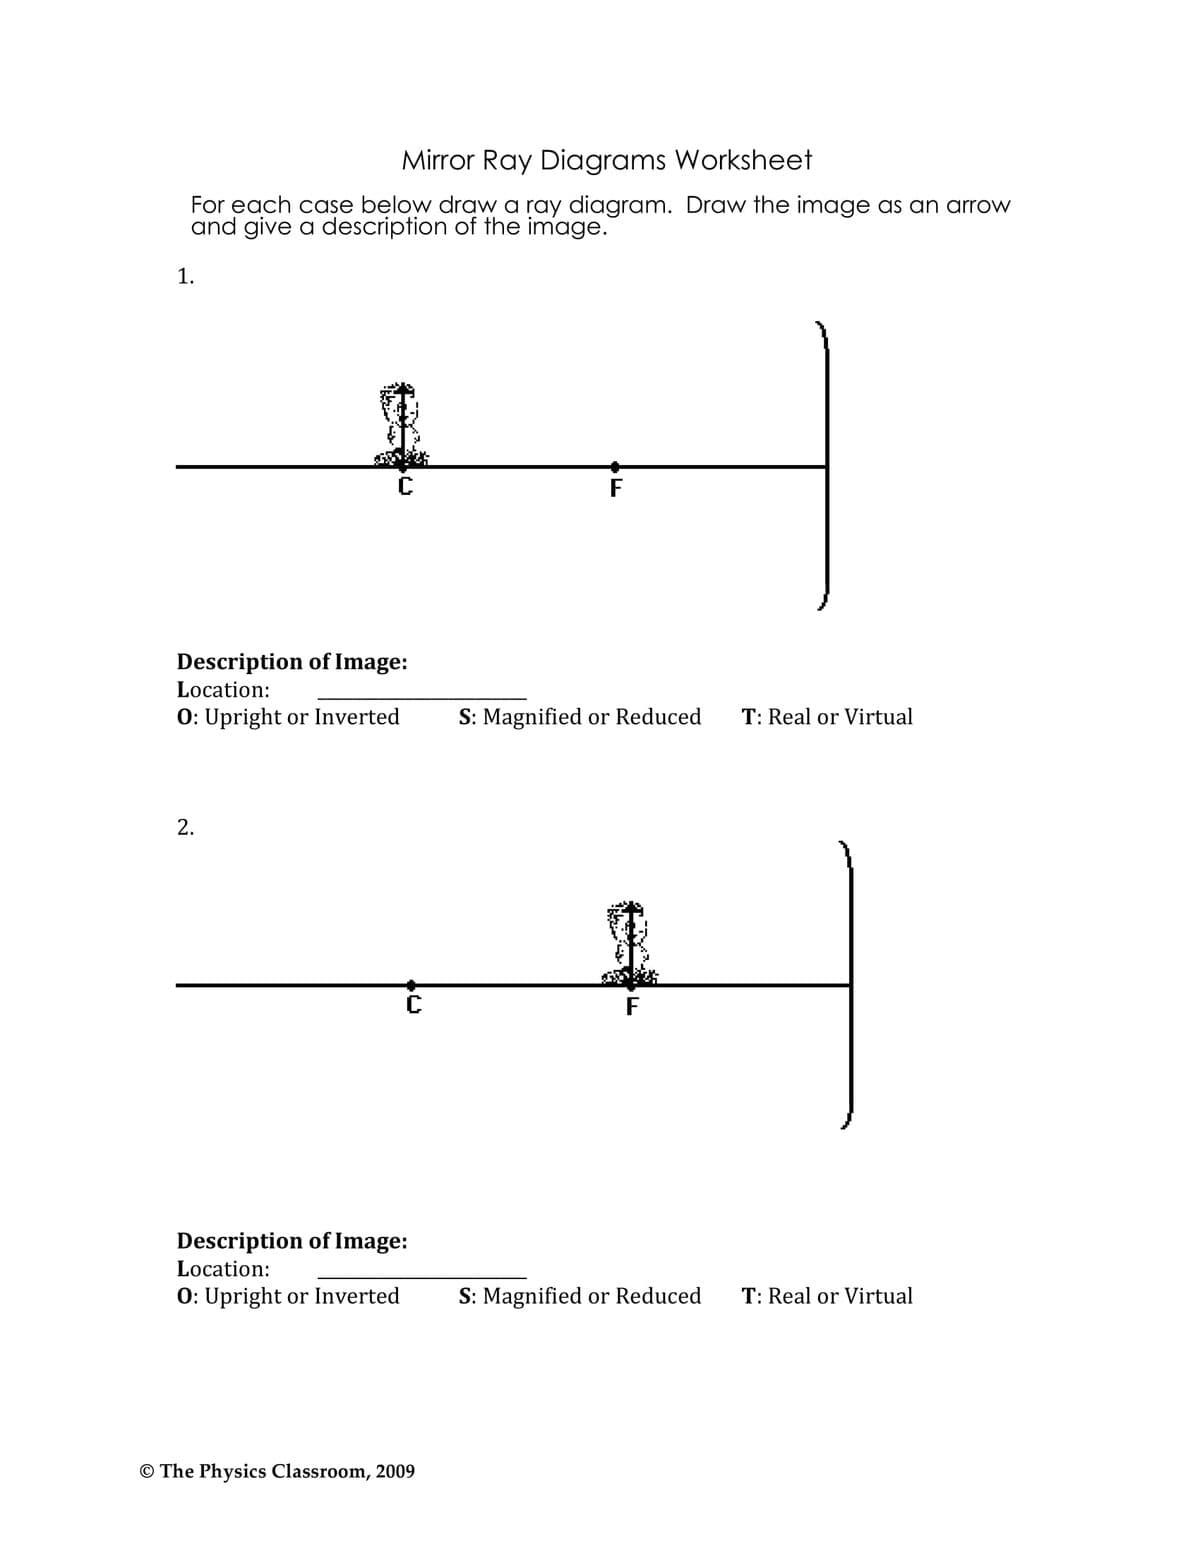 Mirror Ray Diagrams Worksheet
For each case below draw a ray diagram. Draw the image as an arrow
and give a description of the image.
1.
F
Description of Image:
Location:
0: Upright or Inverted
S: Magnified or Reduced
T: Real or Virtual
F
Description of Image:
Location:
0: Upright or Inverted
S: Magnified or Reduced
T: Real or Virtual
© The Physics Classroom, 2009
to
2.
